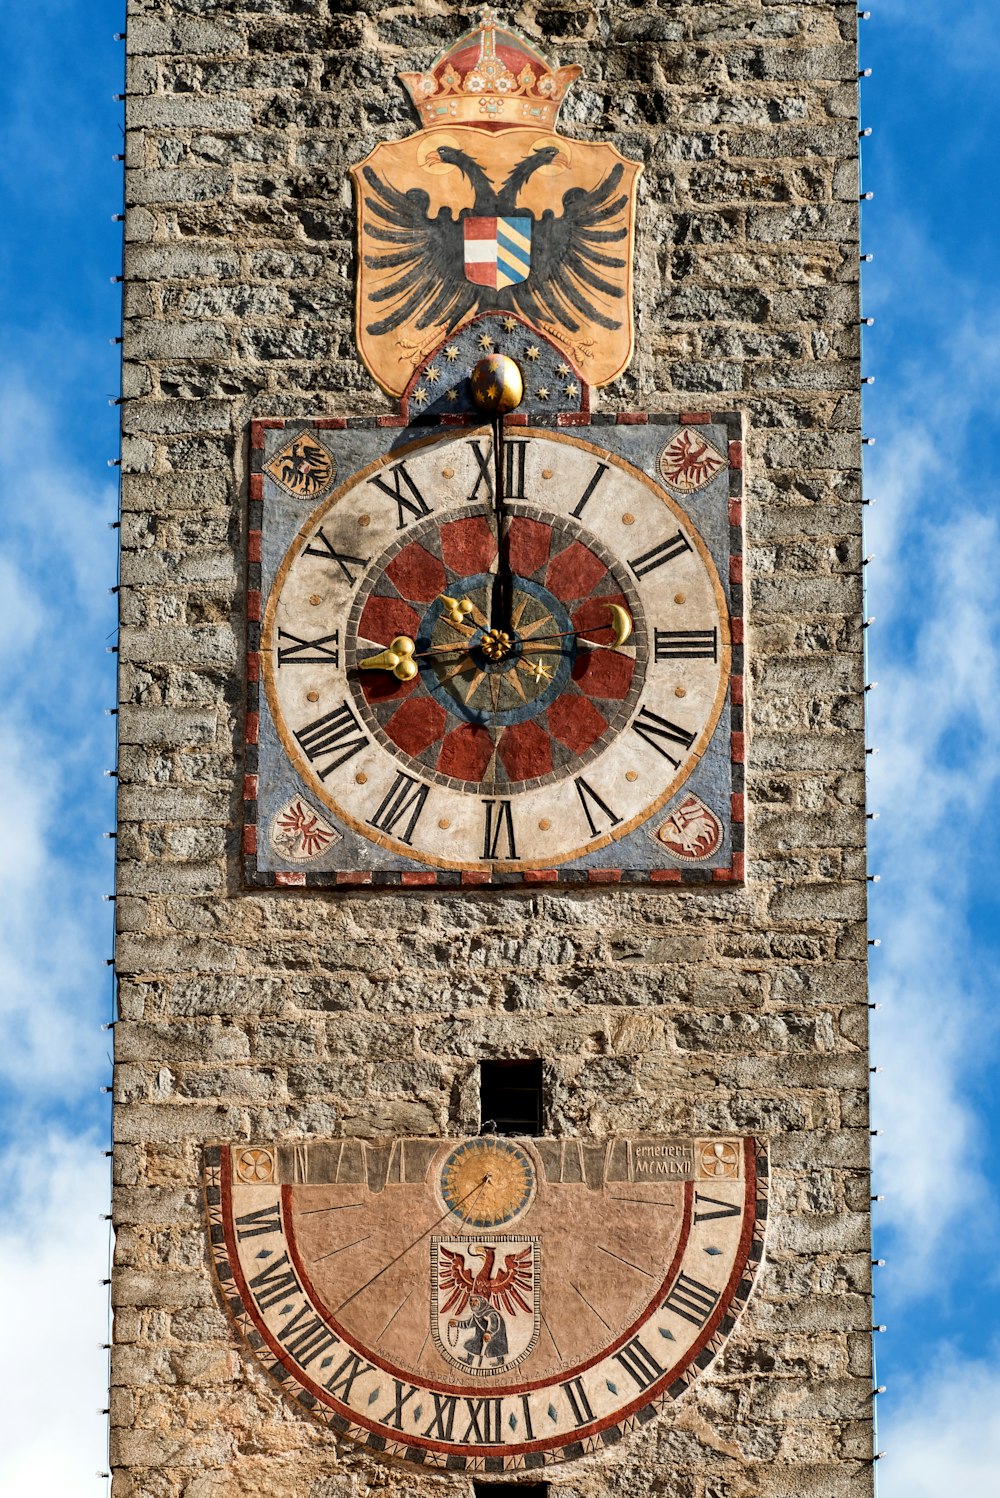 a clock on the side of a building with roman numerals